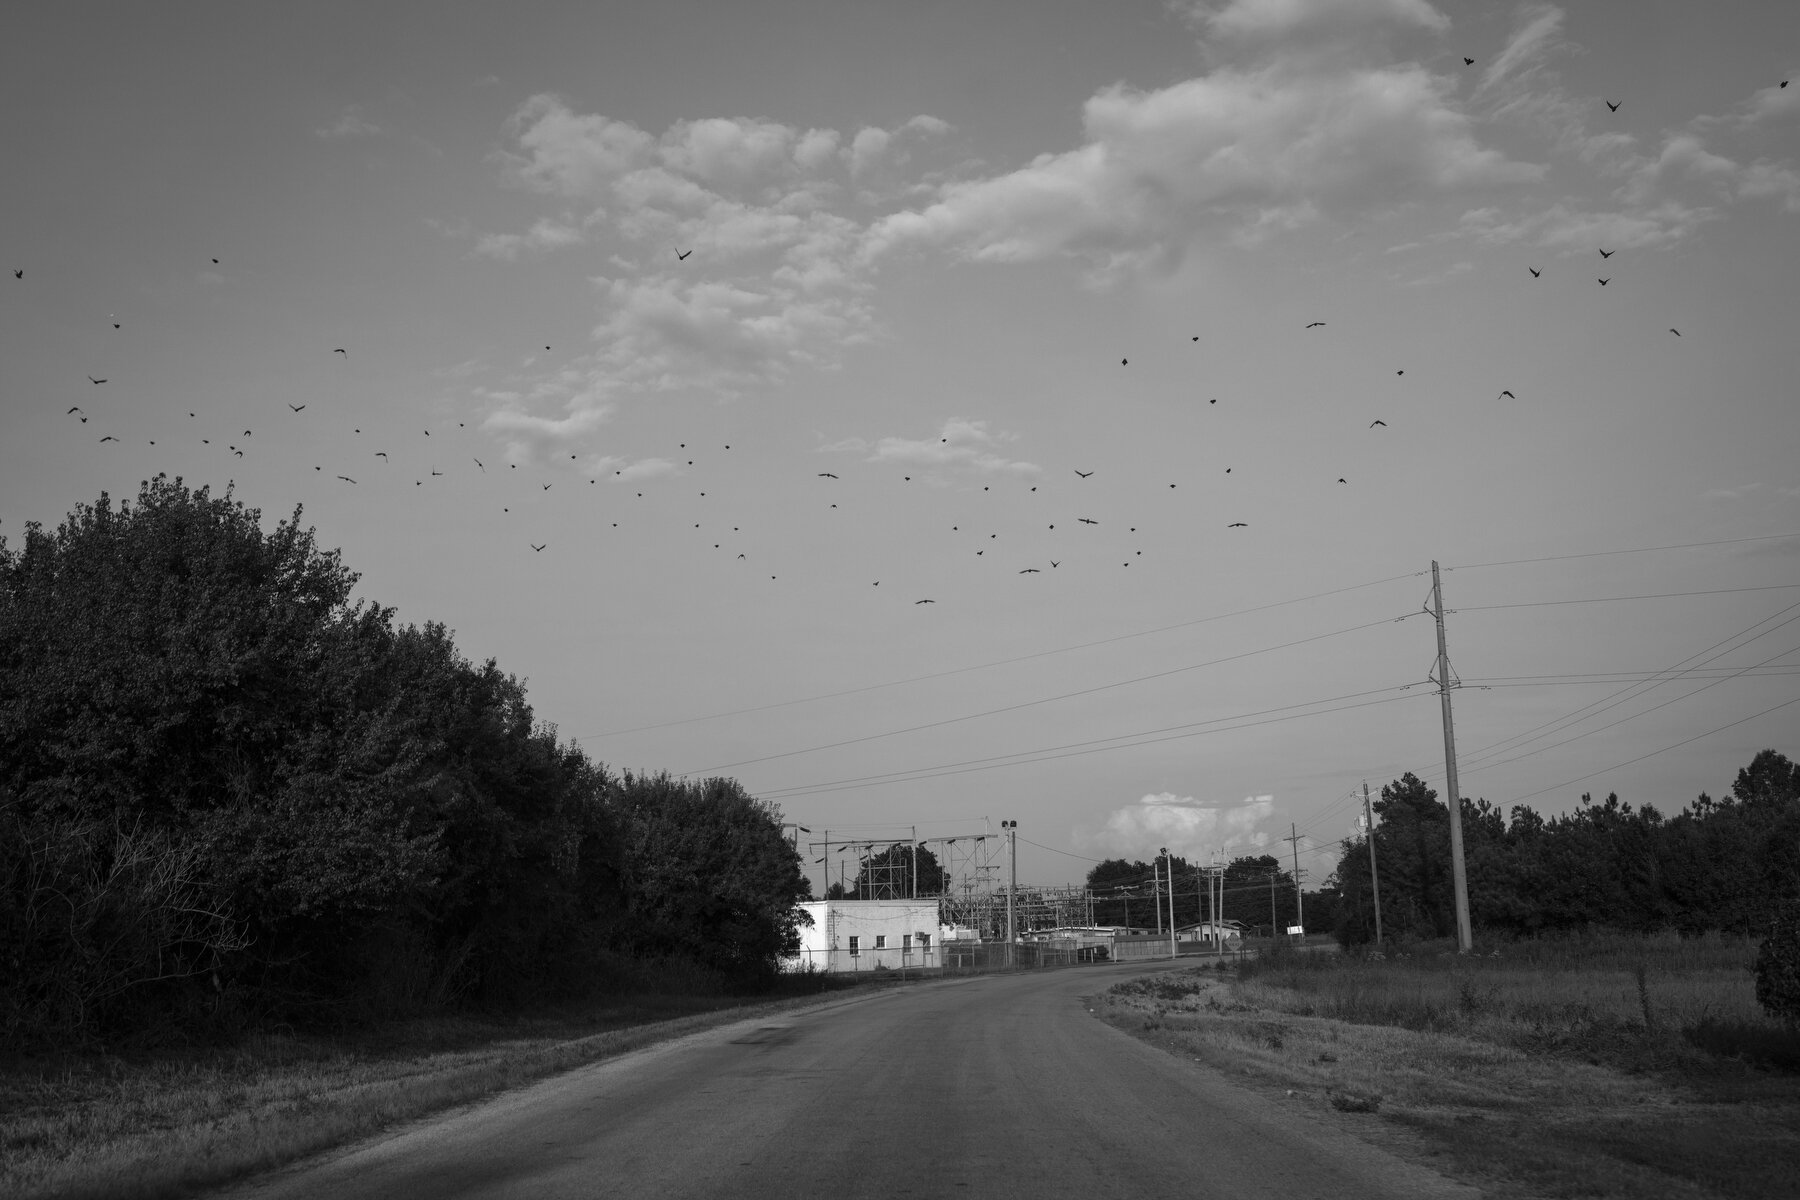  Birds fly over a rural road south of Marks, MS. 